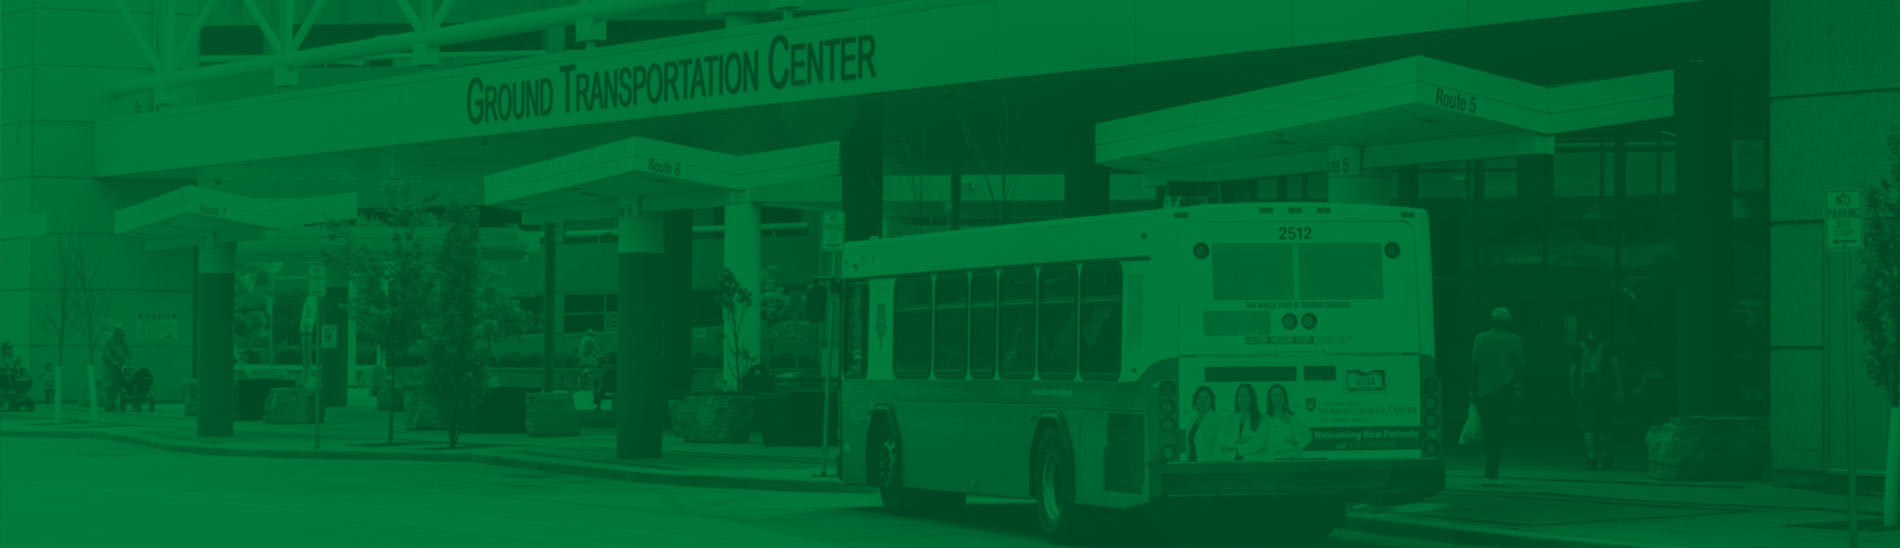 Cedar Rapids Transit bus parked outside of Ground Transportation Center in shades of green